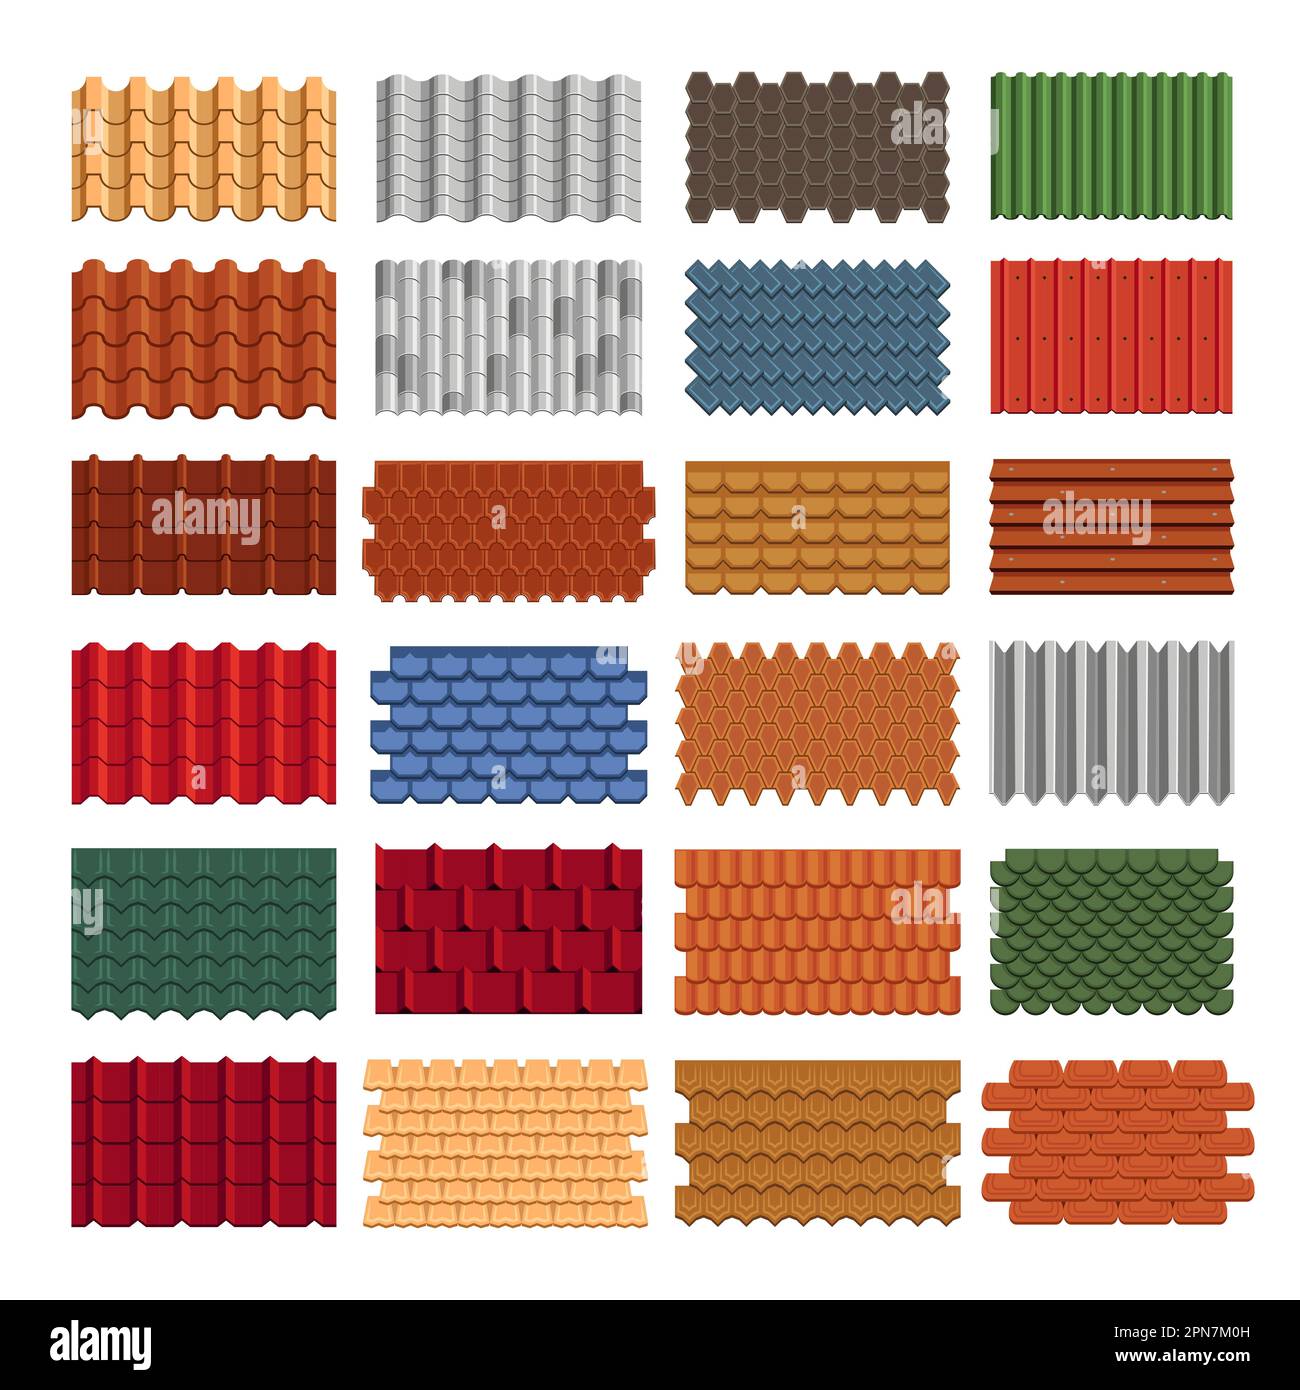 Roofs tiles of different materials vector illustrations set Stock Vector